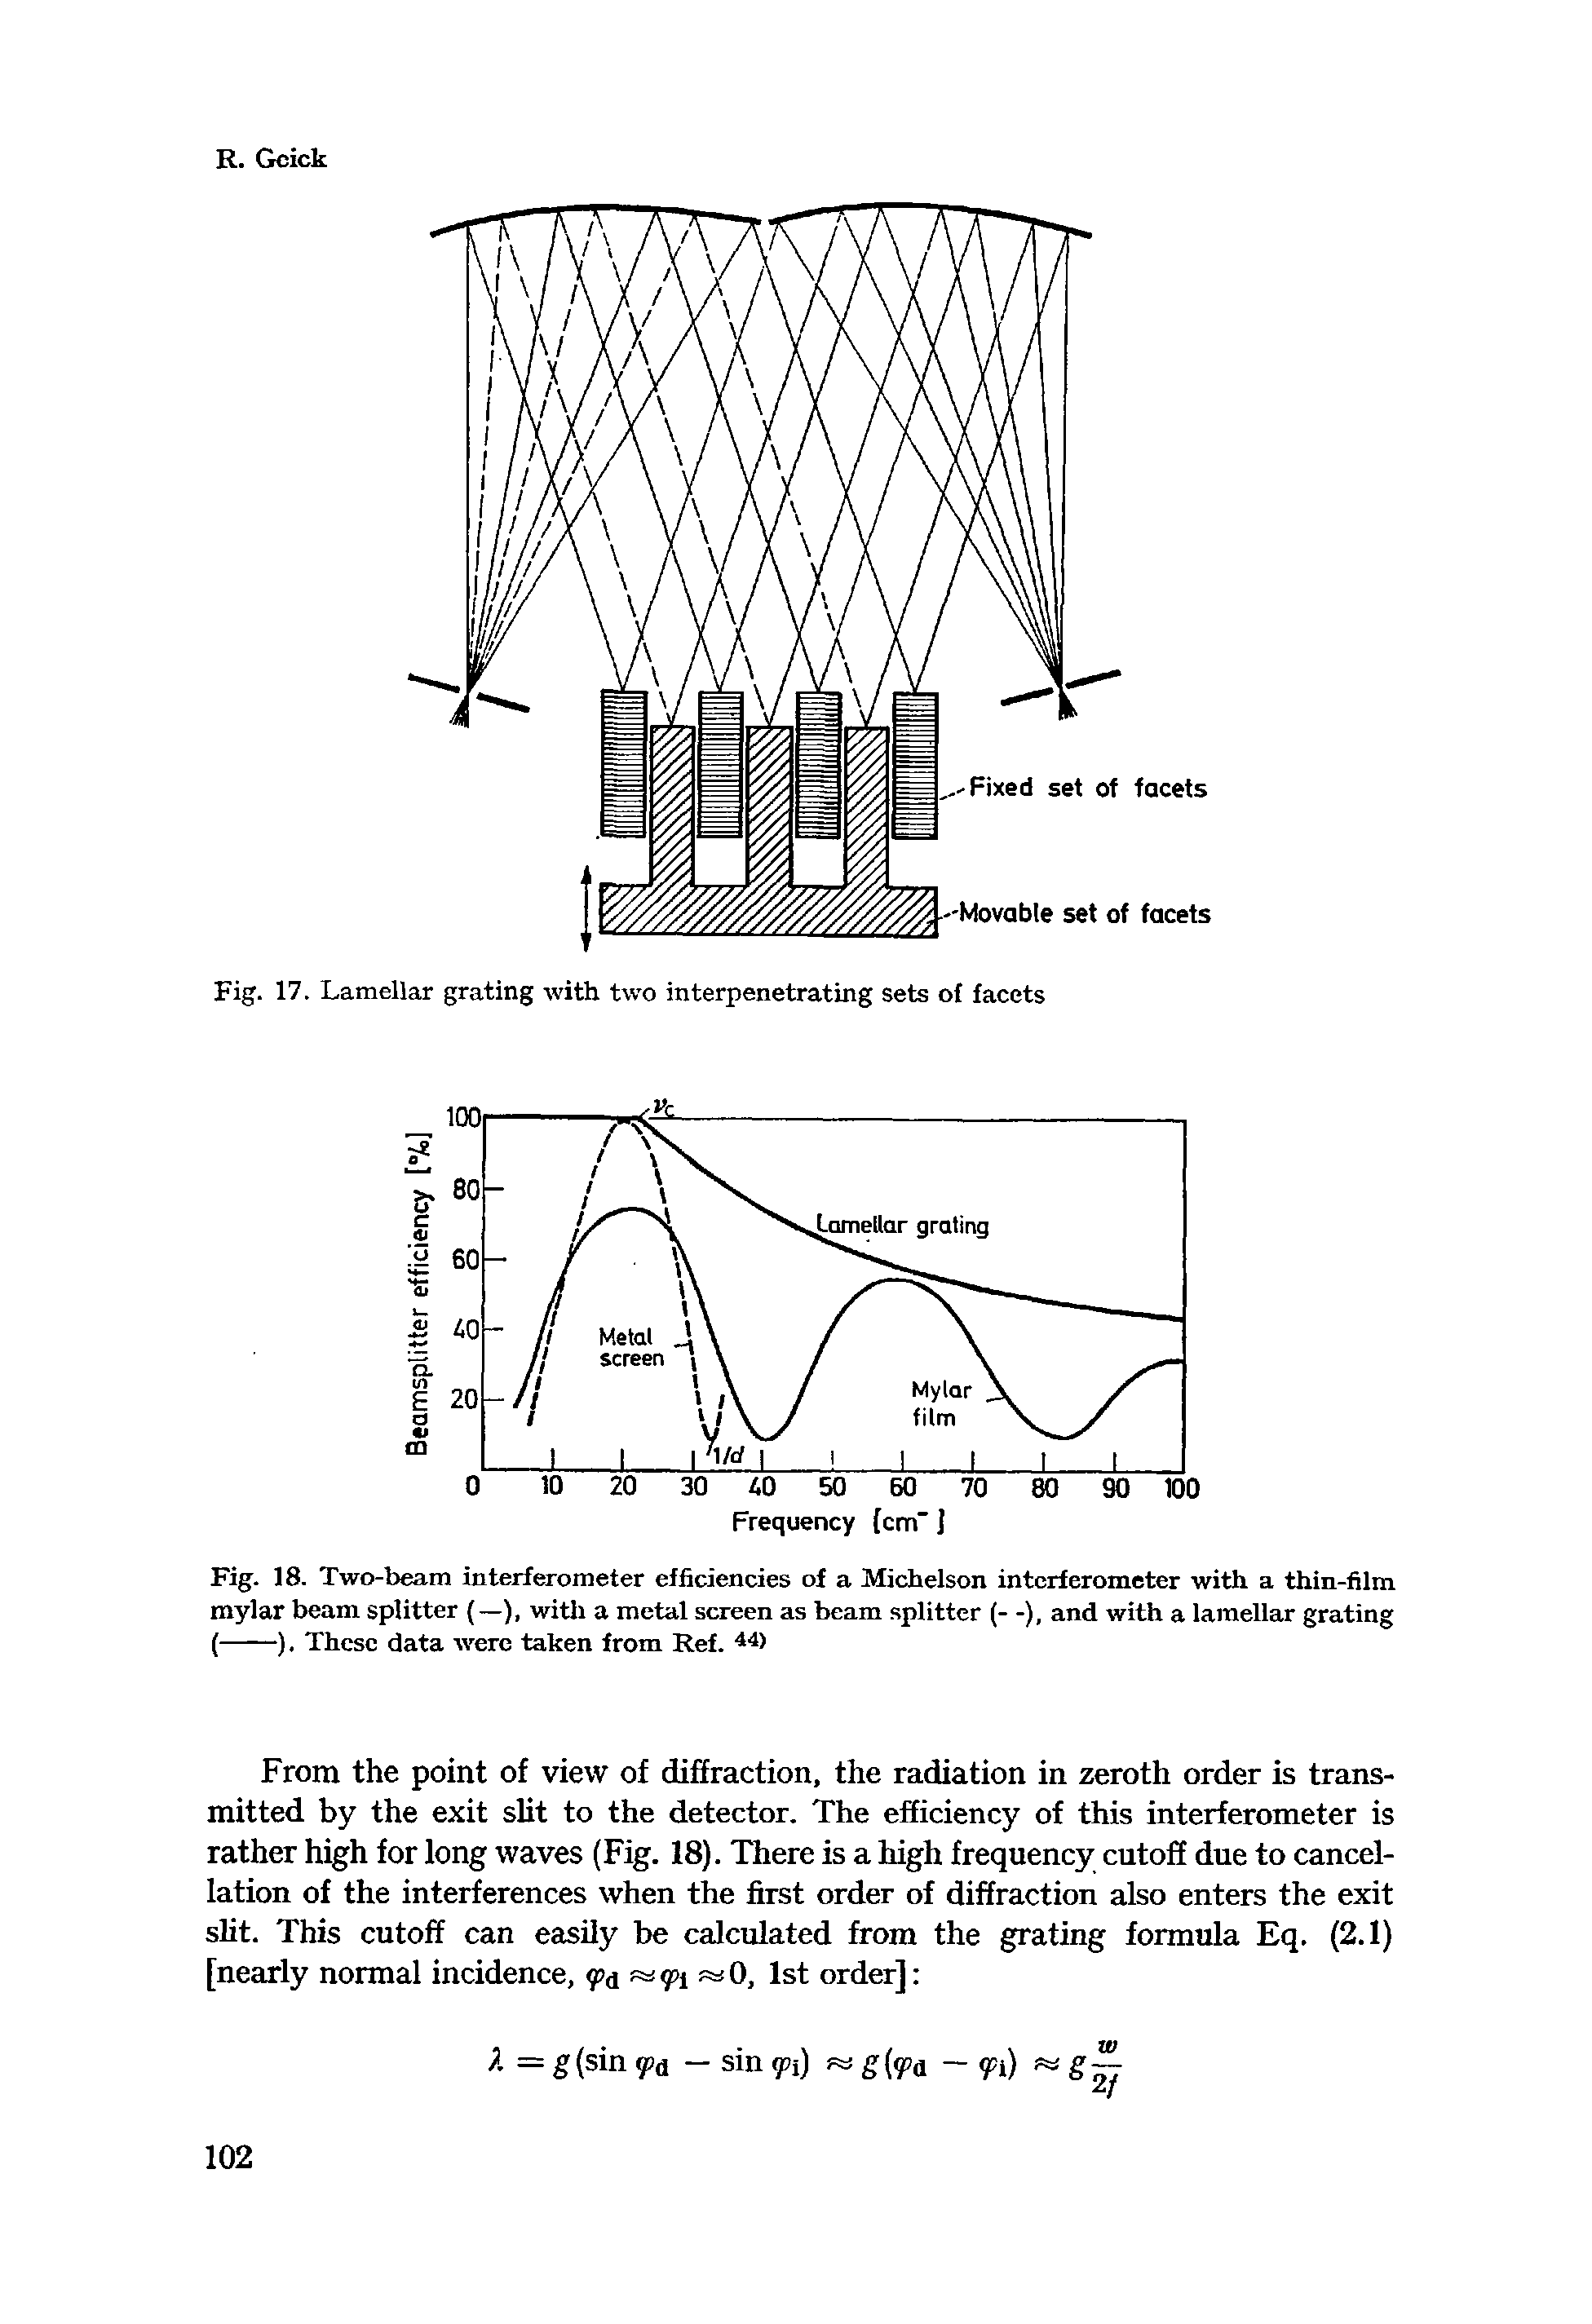 Fig. 18. Two-beam interferometer efficiencies of a Michelson interferometer with a thin-film mylar beam splitter —), witli a metal screen as beam splitter (- -), and with a lamellar grating (----). These data were taken from Ref.